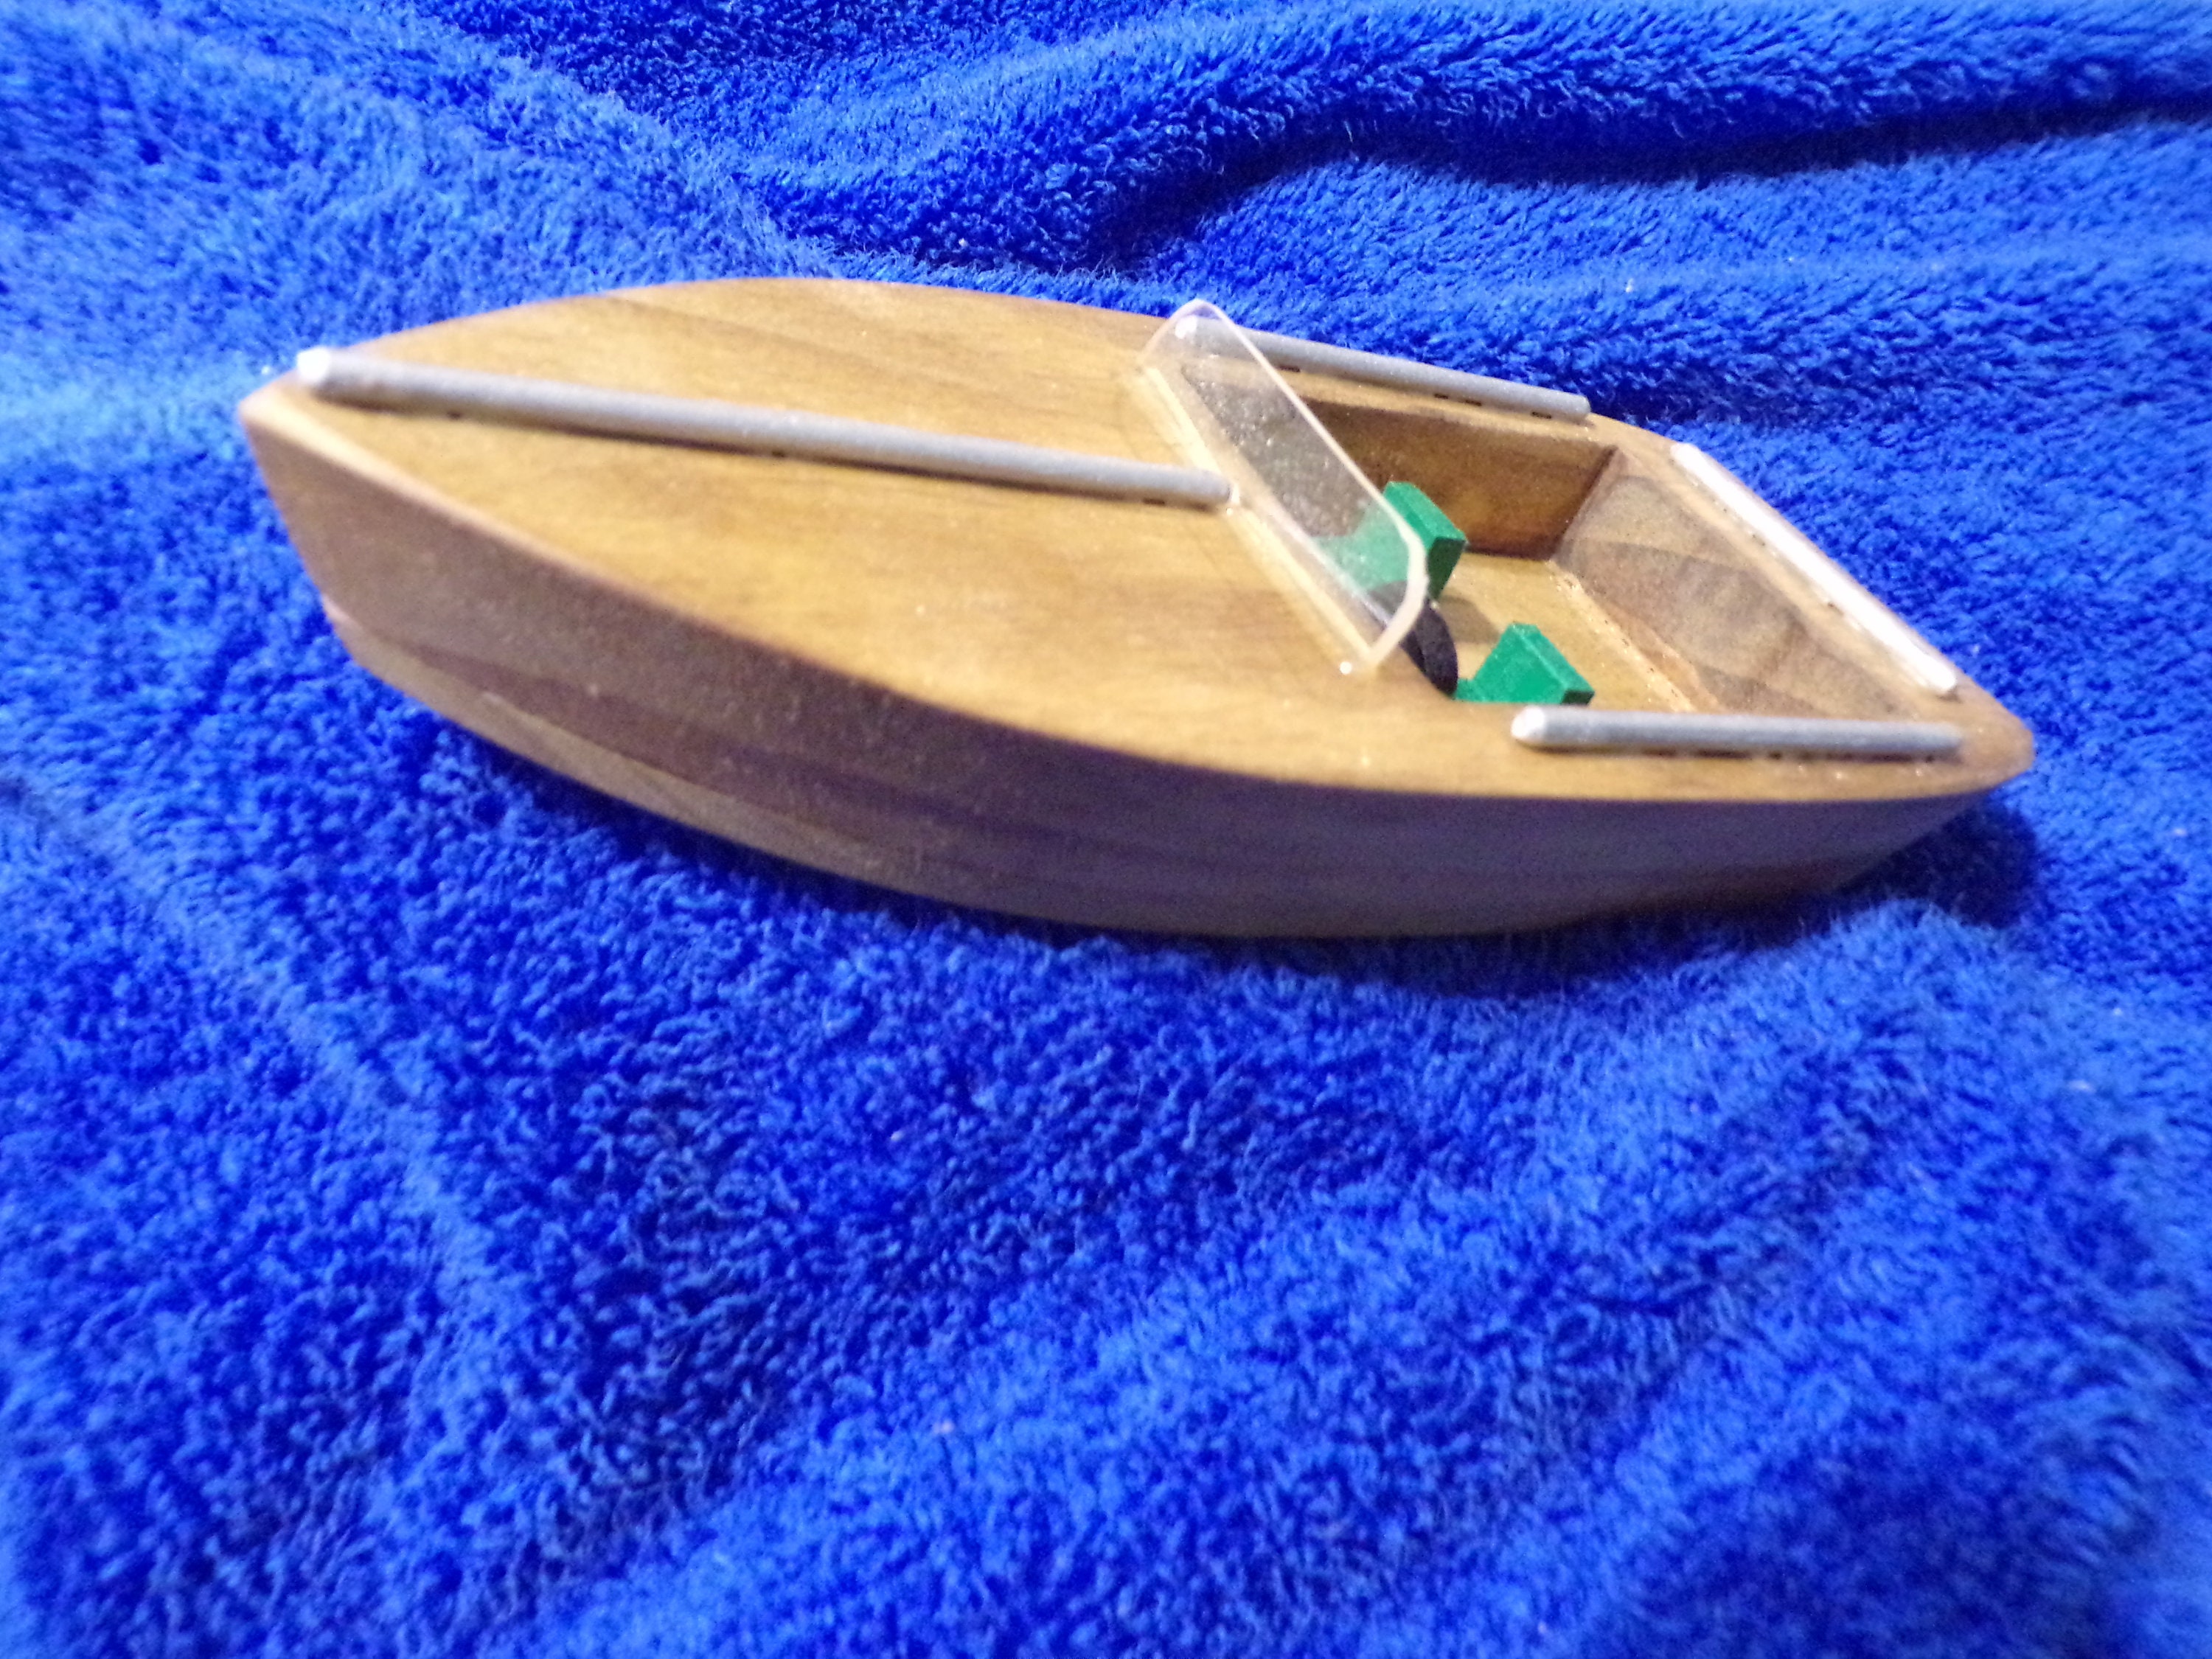 Toy Boat, Wooden Boat, Bathtub Toy, Cruiser Boat, Toy Fishing Boat, Floating  Toy Boat, Nautical Decor, Toy Row Boat, Pool Toy, River Boat -  Canada